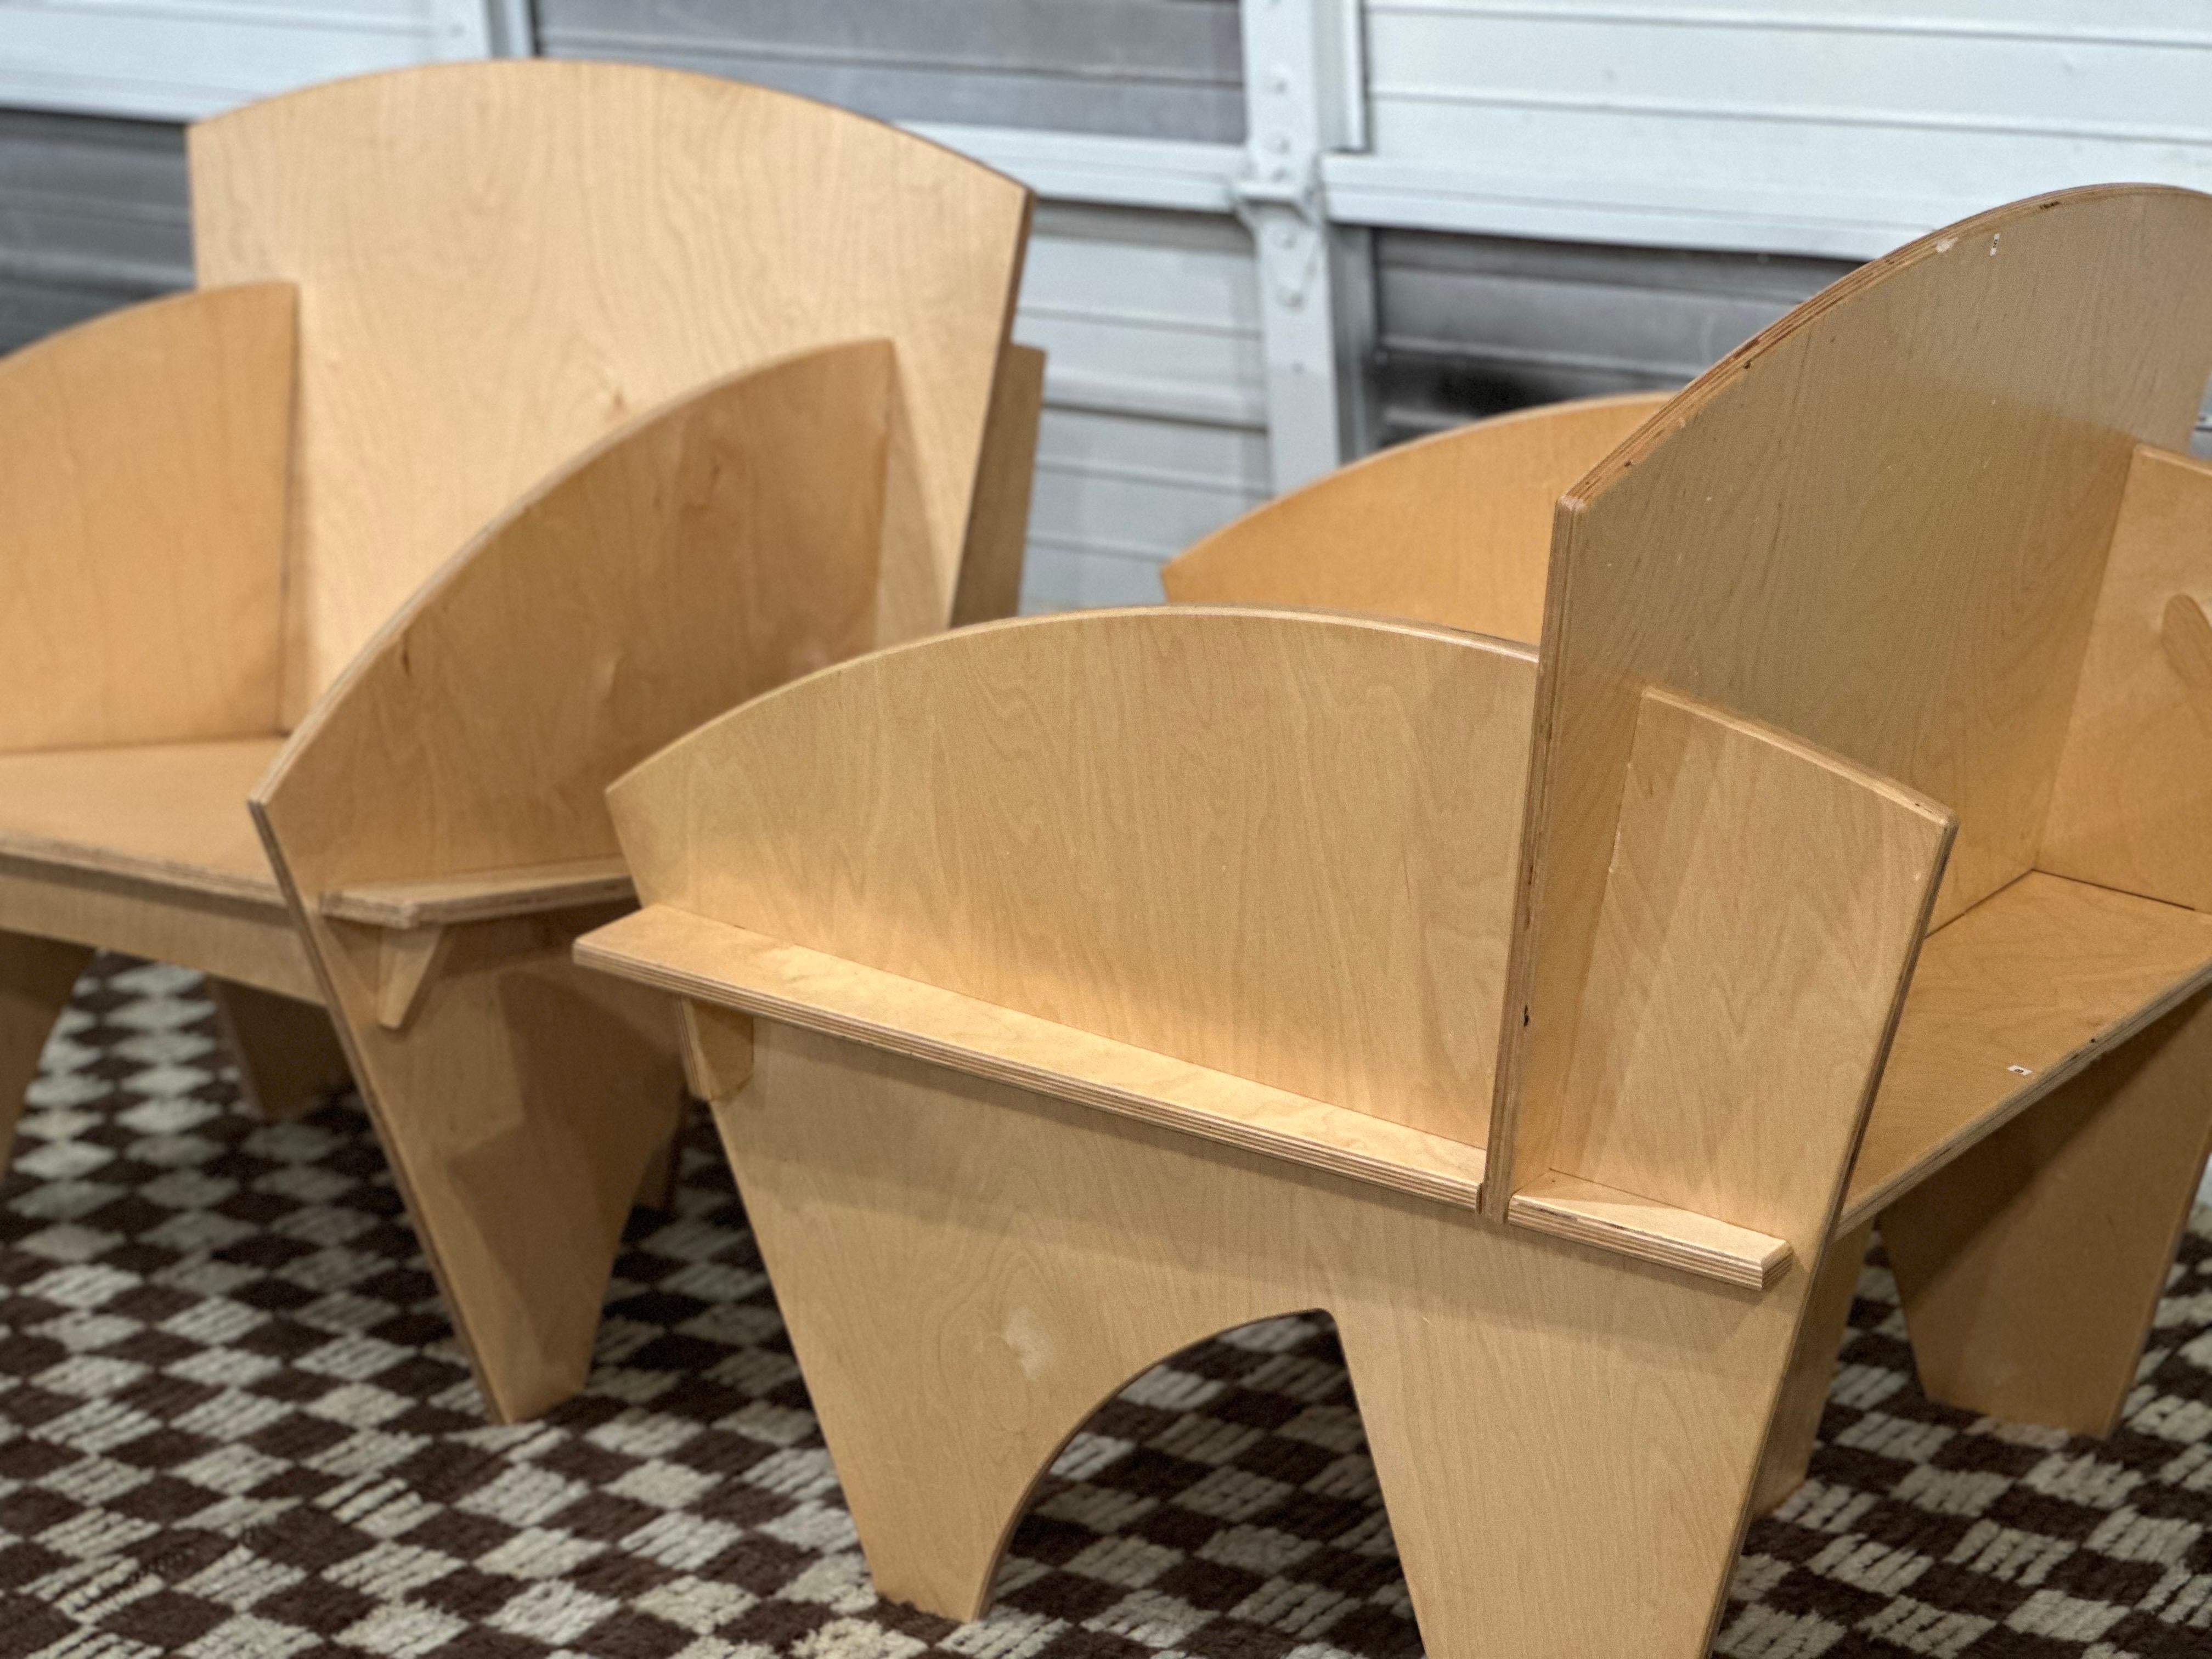 This listing is for ONE puzzle piece plywood chair (two available). Each chair is extremely sturdy with minimal, if any, signs of age-consistent wear. Chairs are held together by  meticulously connecting each puzzle piece in methodic order. Chairs